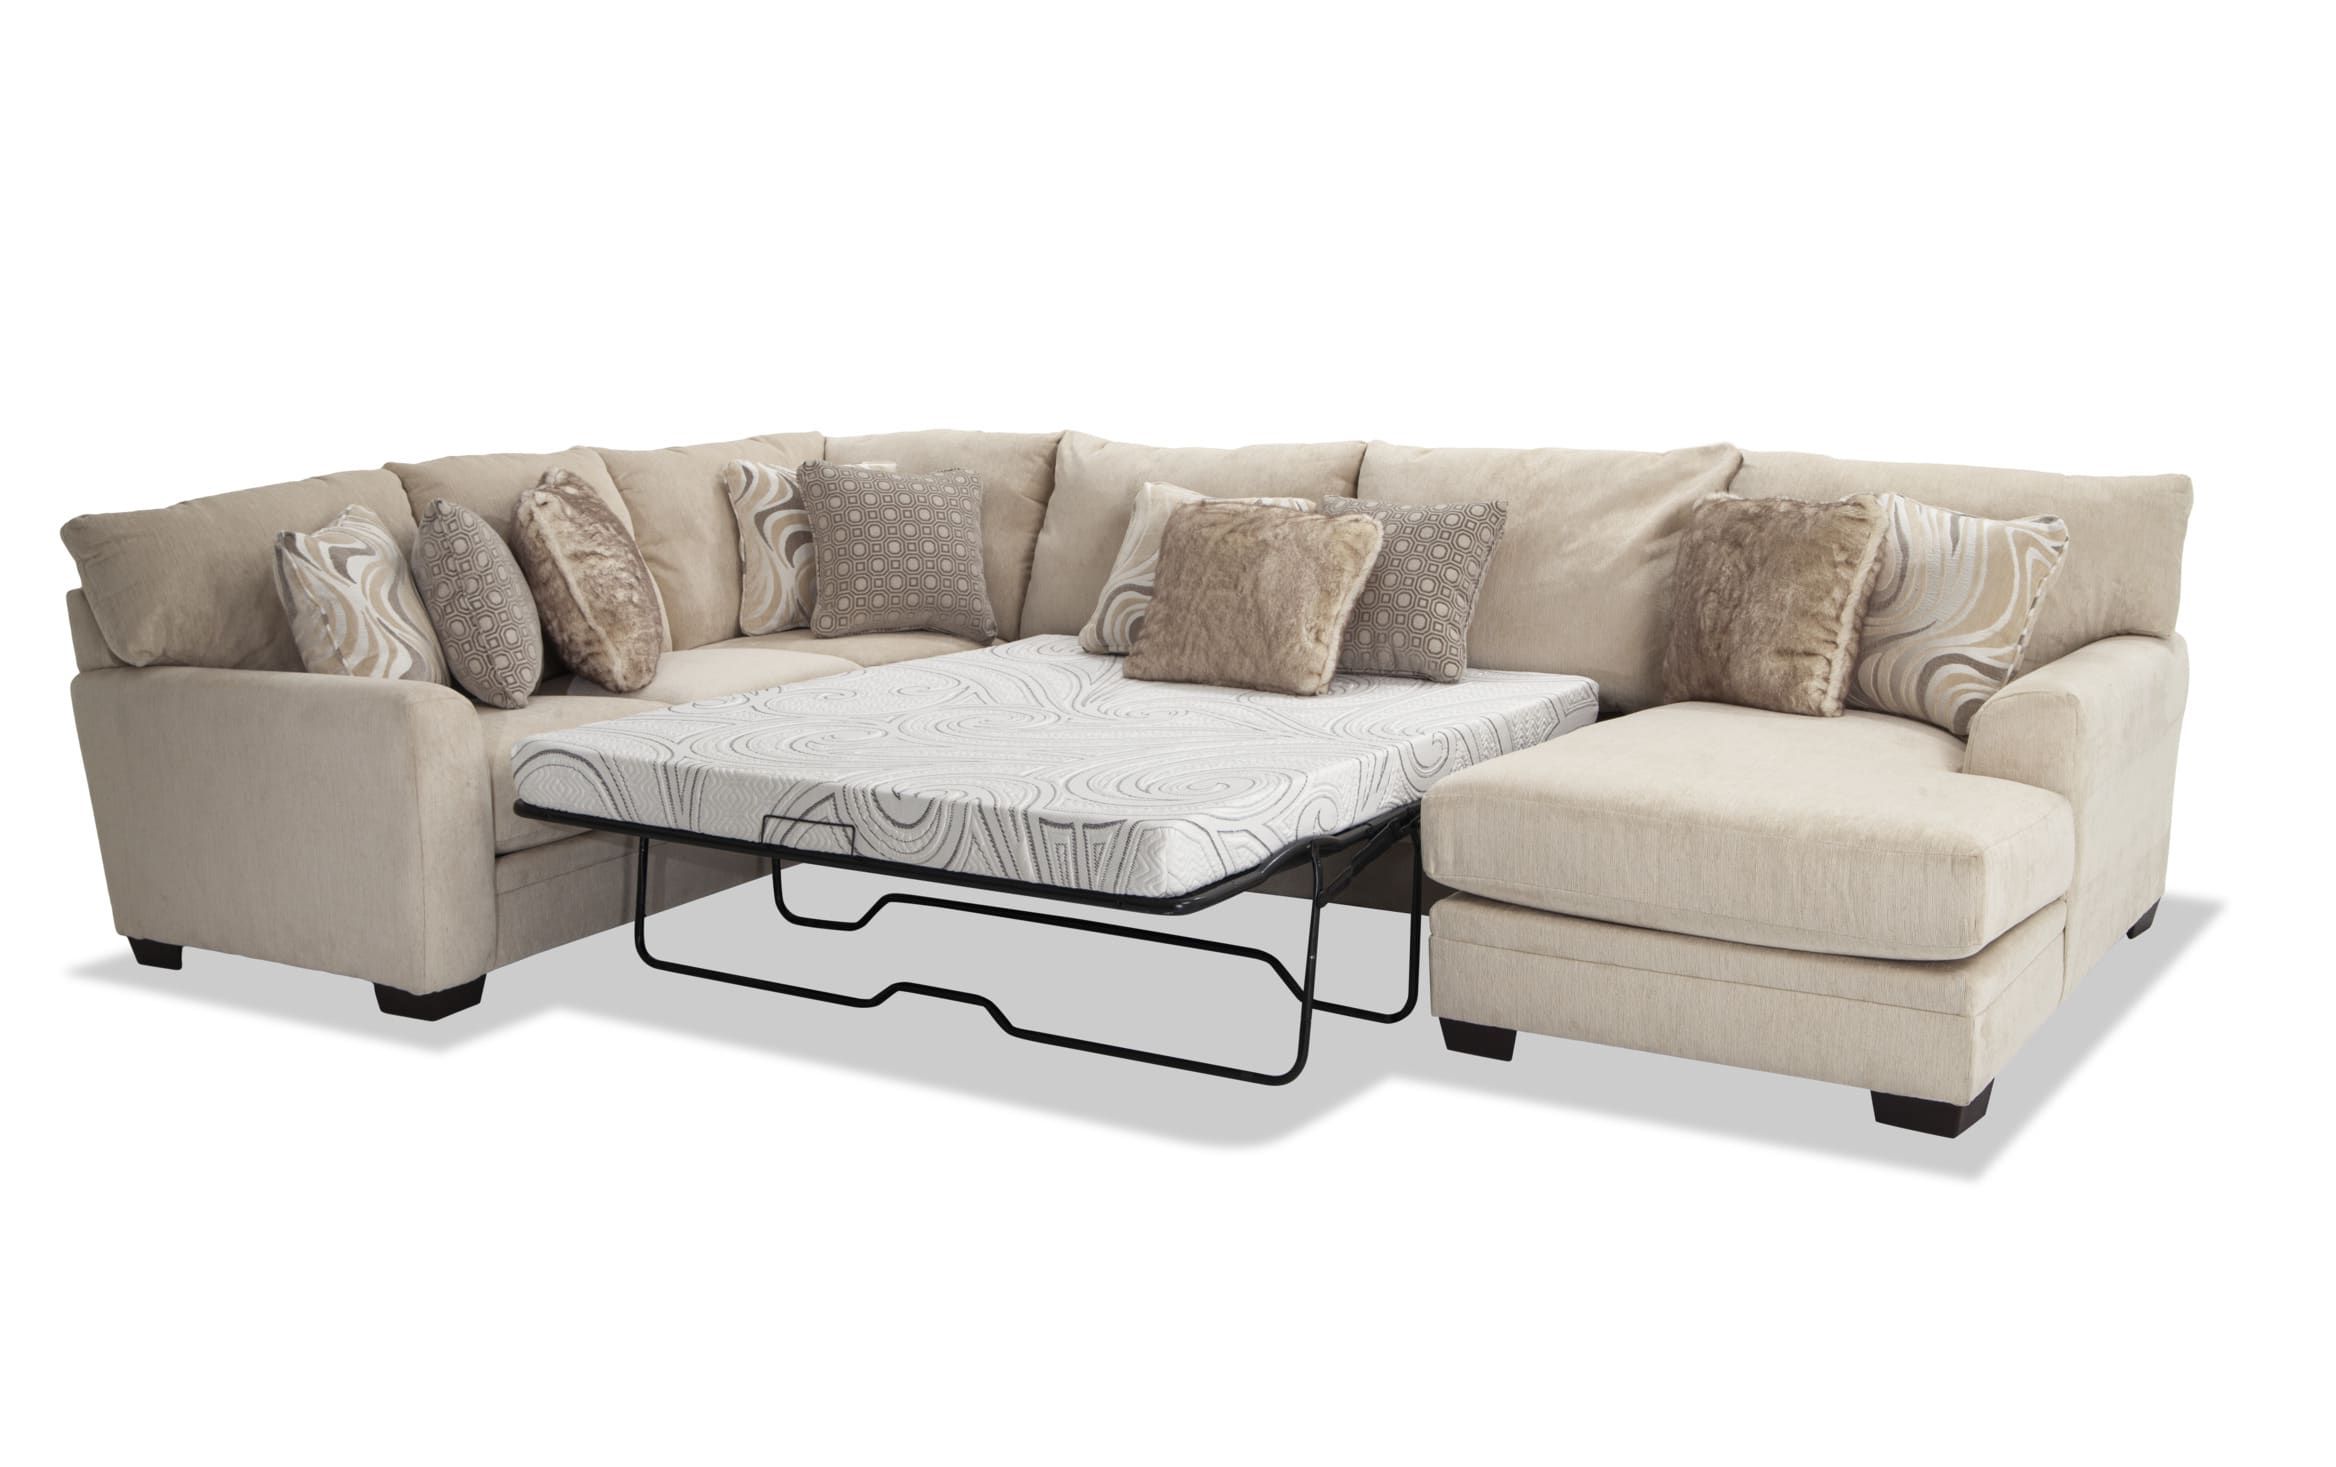 Luxe Cream 4 Piece Right Arm Facing Bob O Pedic Cooling Queen Sleeper  Sectional With Chaise | Bob's Discount Furniture Regarding Left Or Right Facing Sleeper Sectional Sofas (Gallery 4 of 20)